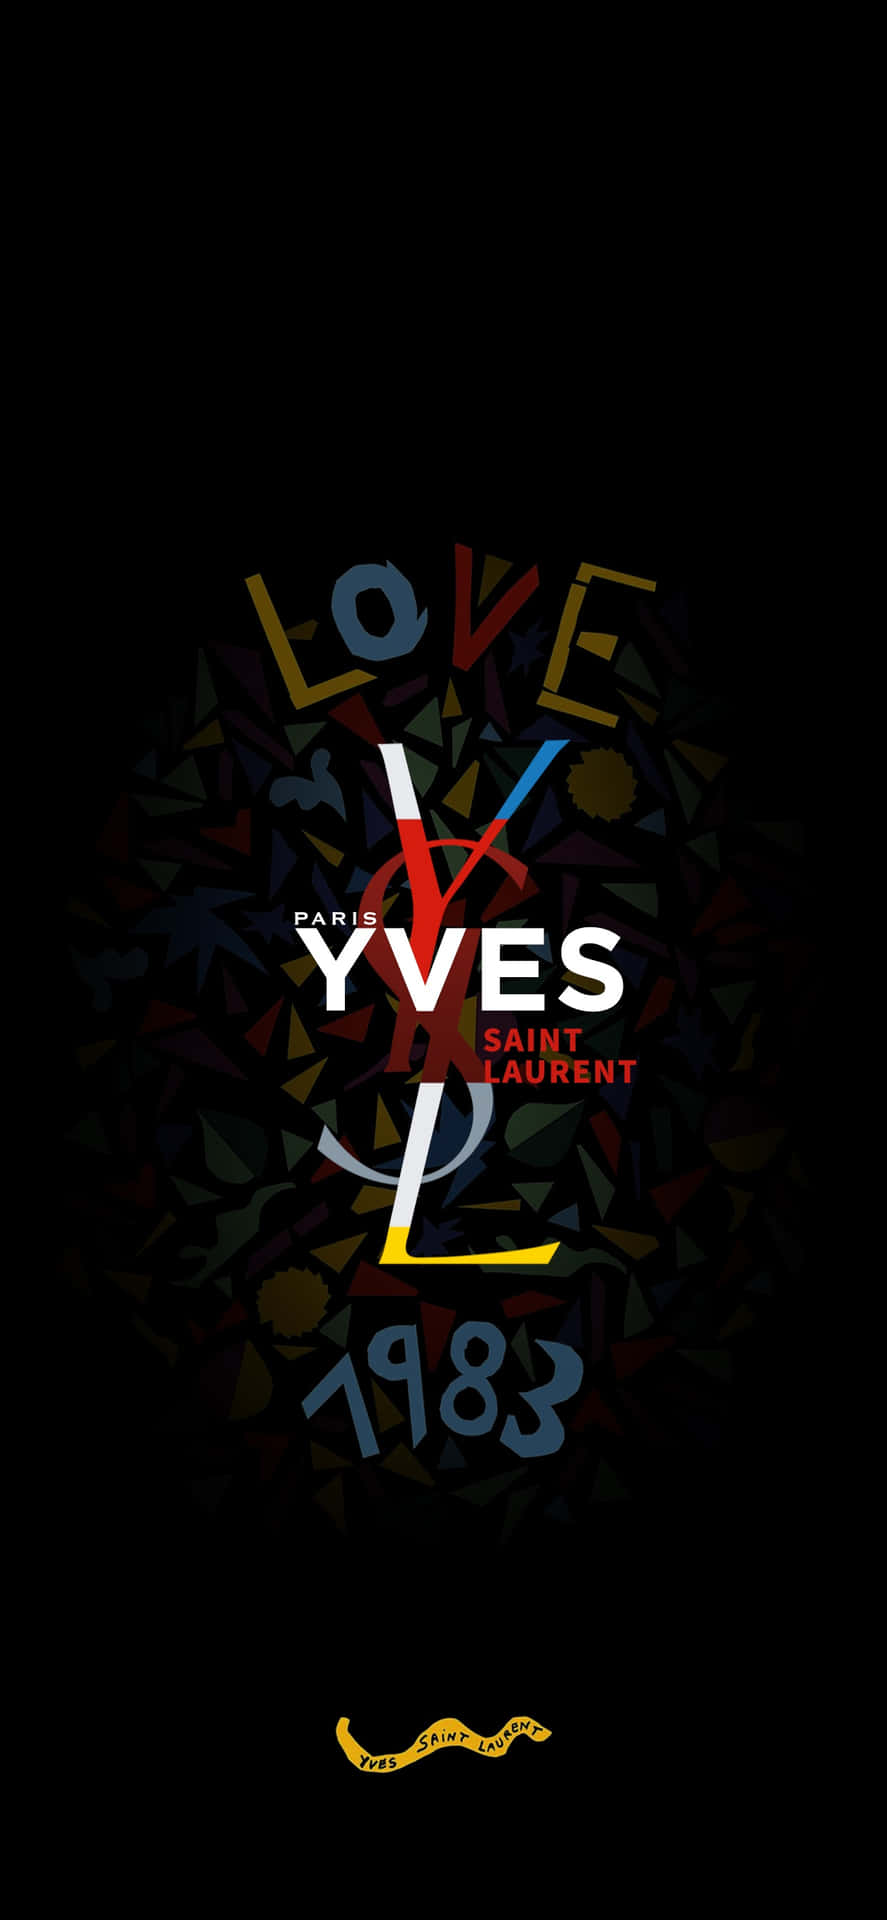 Witness the allure of Yves Saint Laurent, the iconic fashion house.